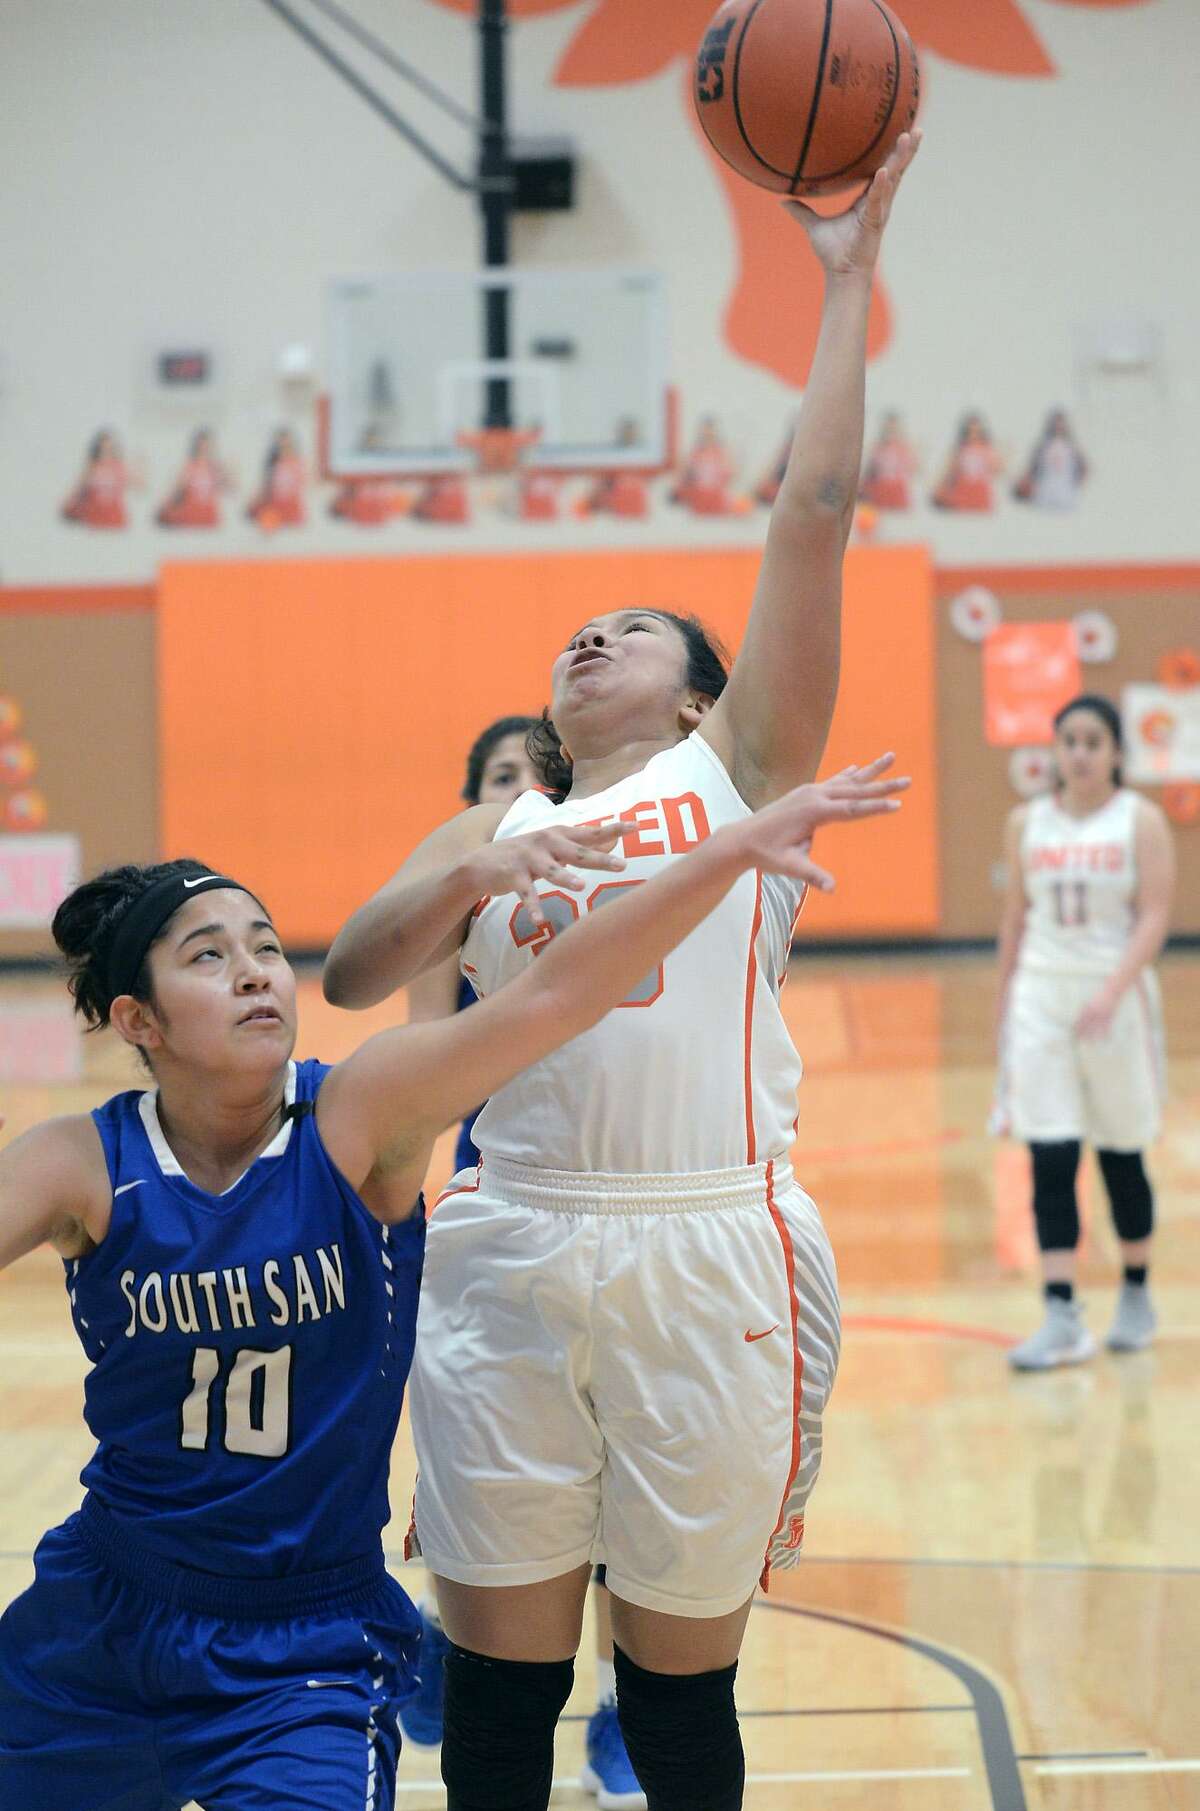 Ileana Rodriguez and United improved to 8-1 and maintained control of first place in District 29-6A with a 67-52 victory Saturday over South San.